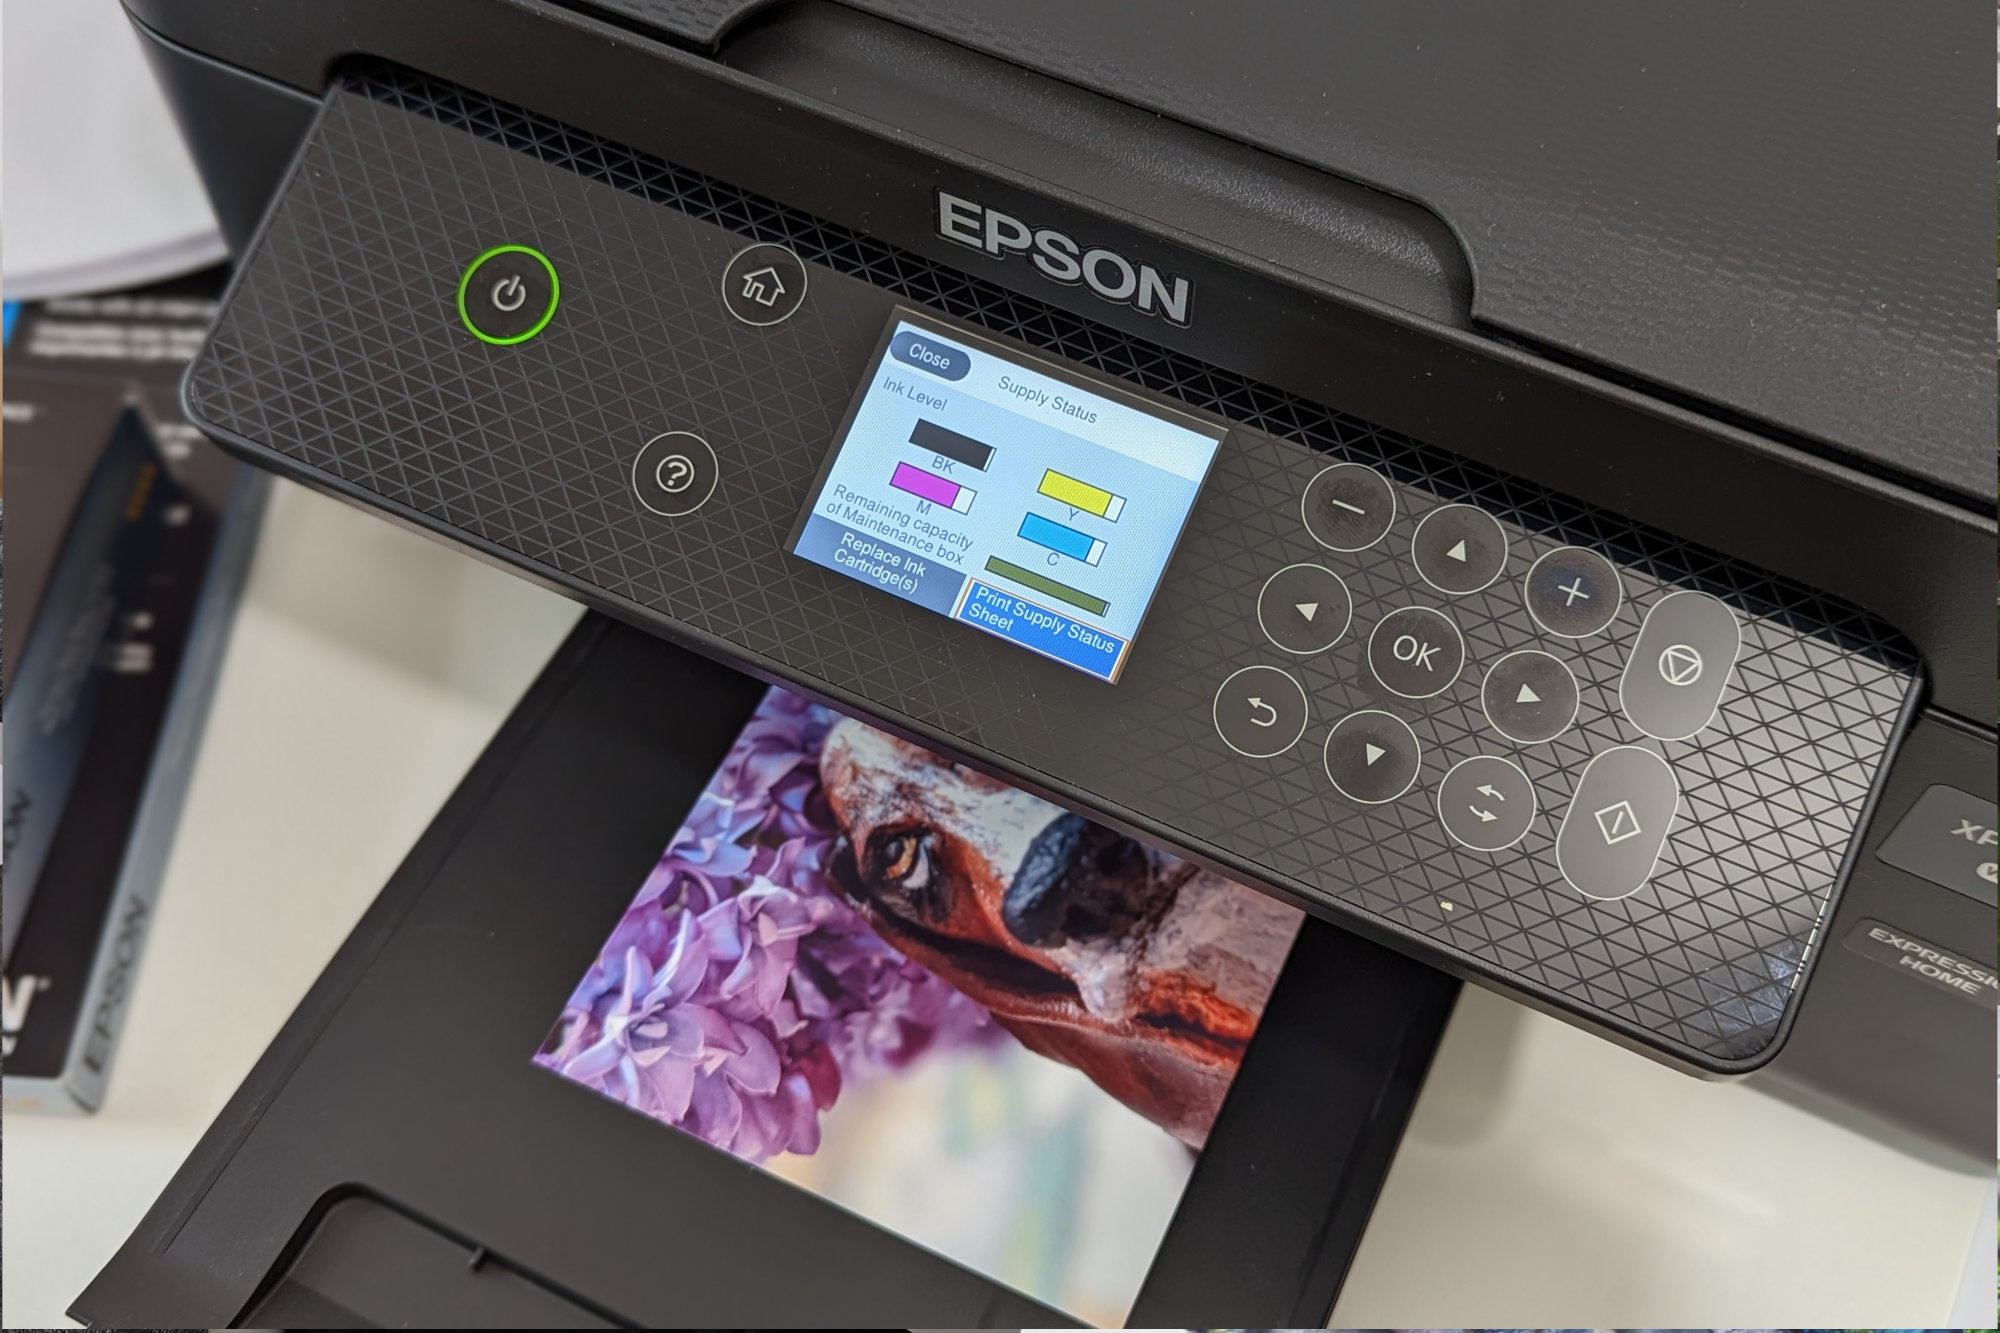 Epson XP 4200 Ink Cartridge Replacement. 